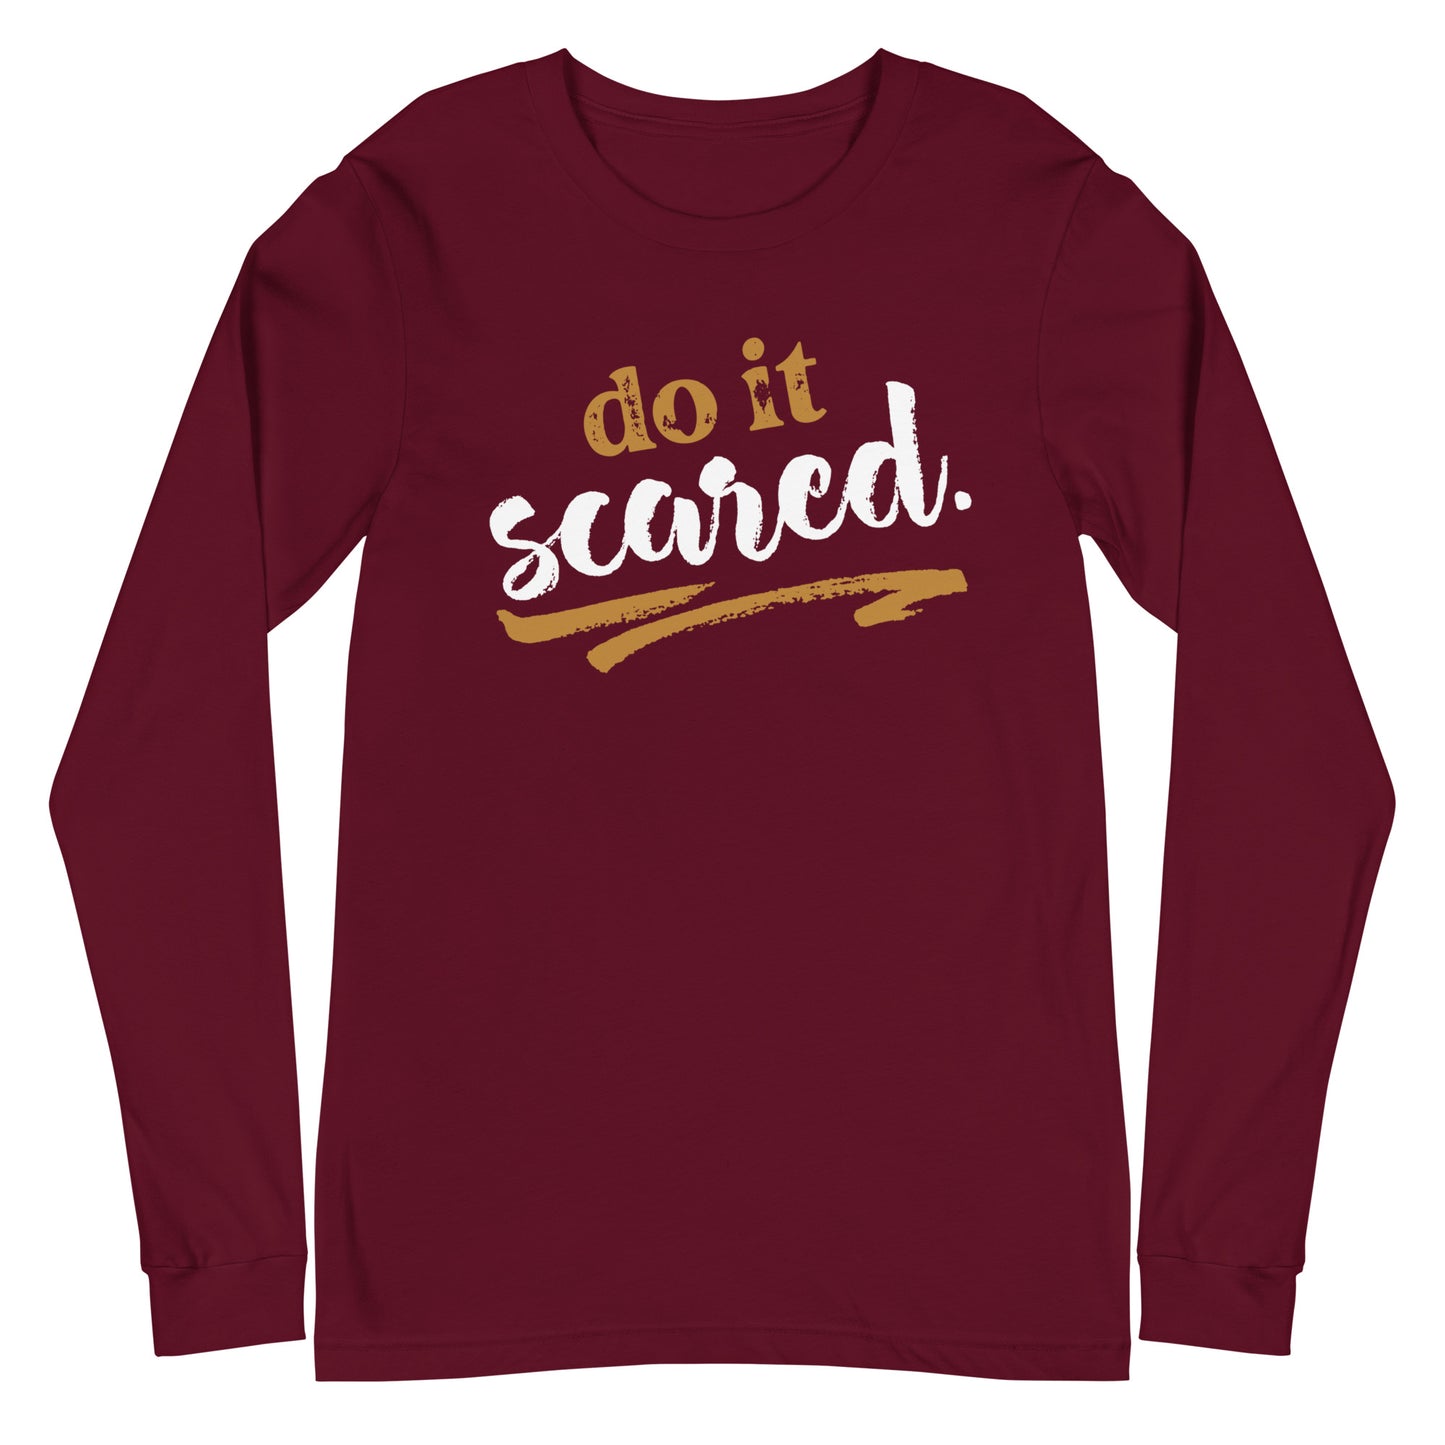 Do It Scared faith over fear 2 Timothy 1:7 do not fear bible verse Christian aesthetic design printed in white and gold on soft maroon unisex long sleeve tee shirt for women and men